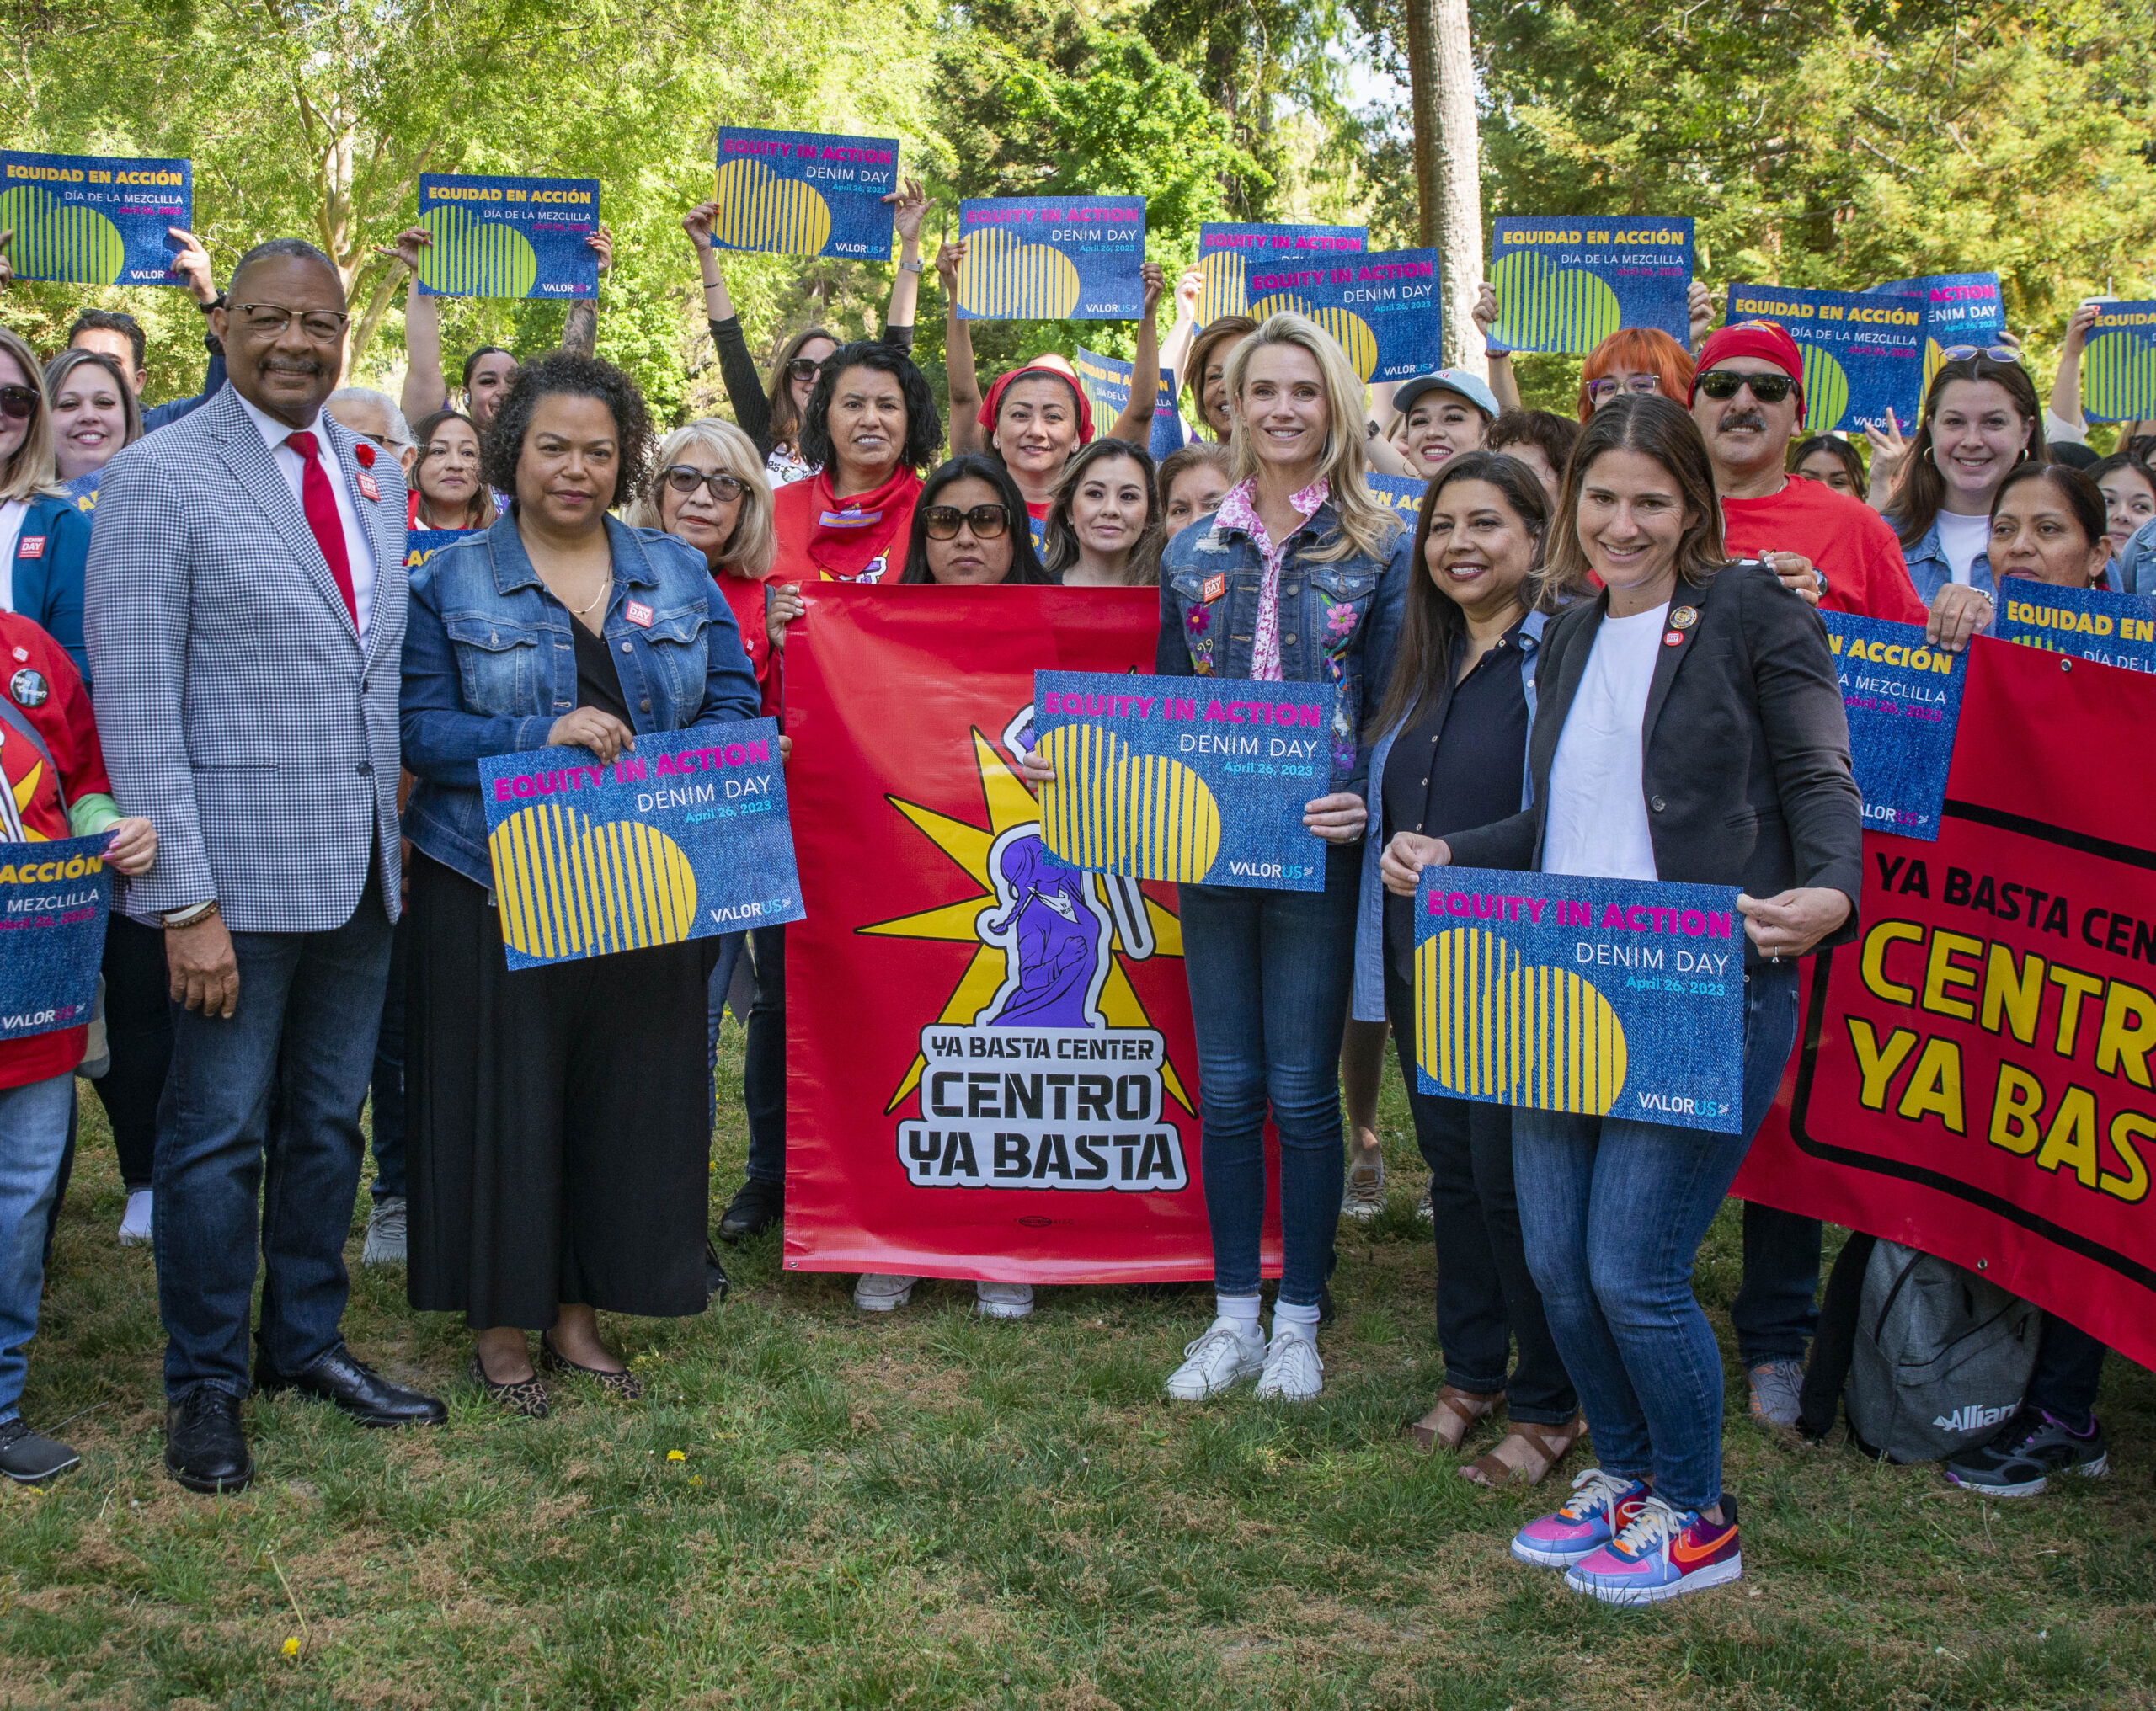 VALOR’s CEO, Sandra Henriquez, standing next to the First Partner of California and Assemblymembers Bauer-Kahan, Bonta, and Jones-Sawyer. Members from the ¡Ya Basta! Center are standing behind them holding up Denim Day signs.